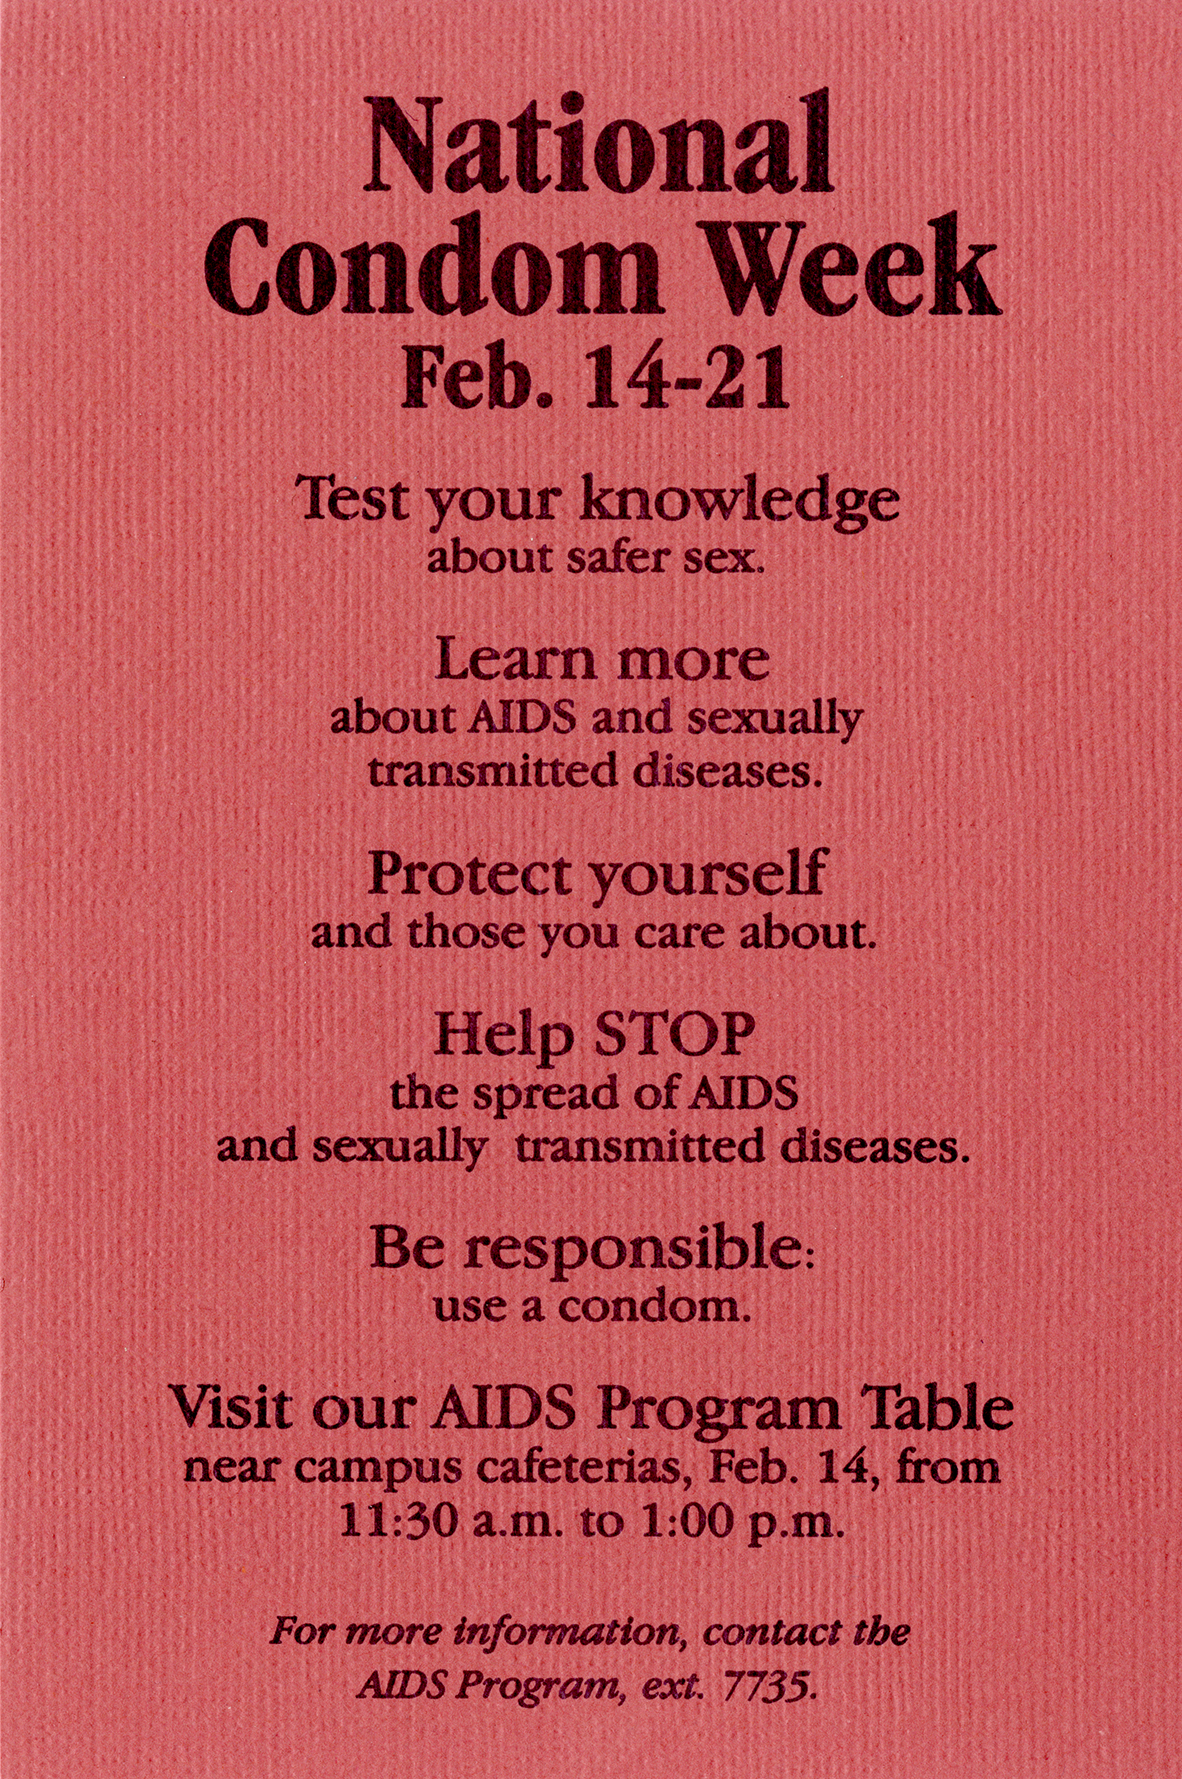 Red flyer for National Condom Week, Feb. 14-21